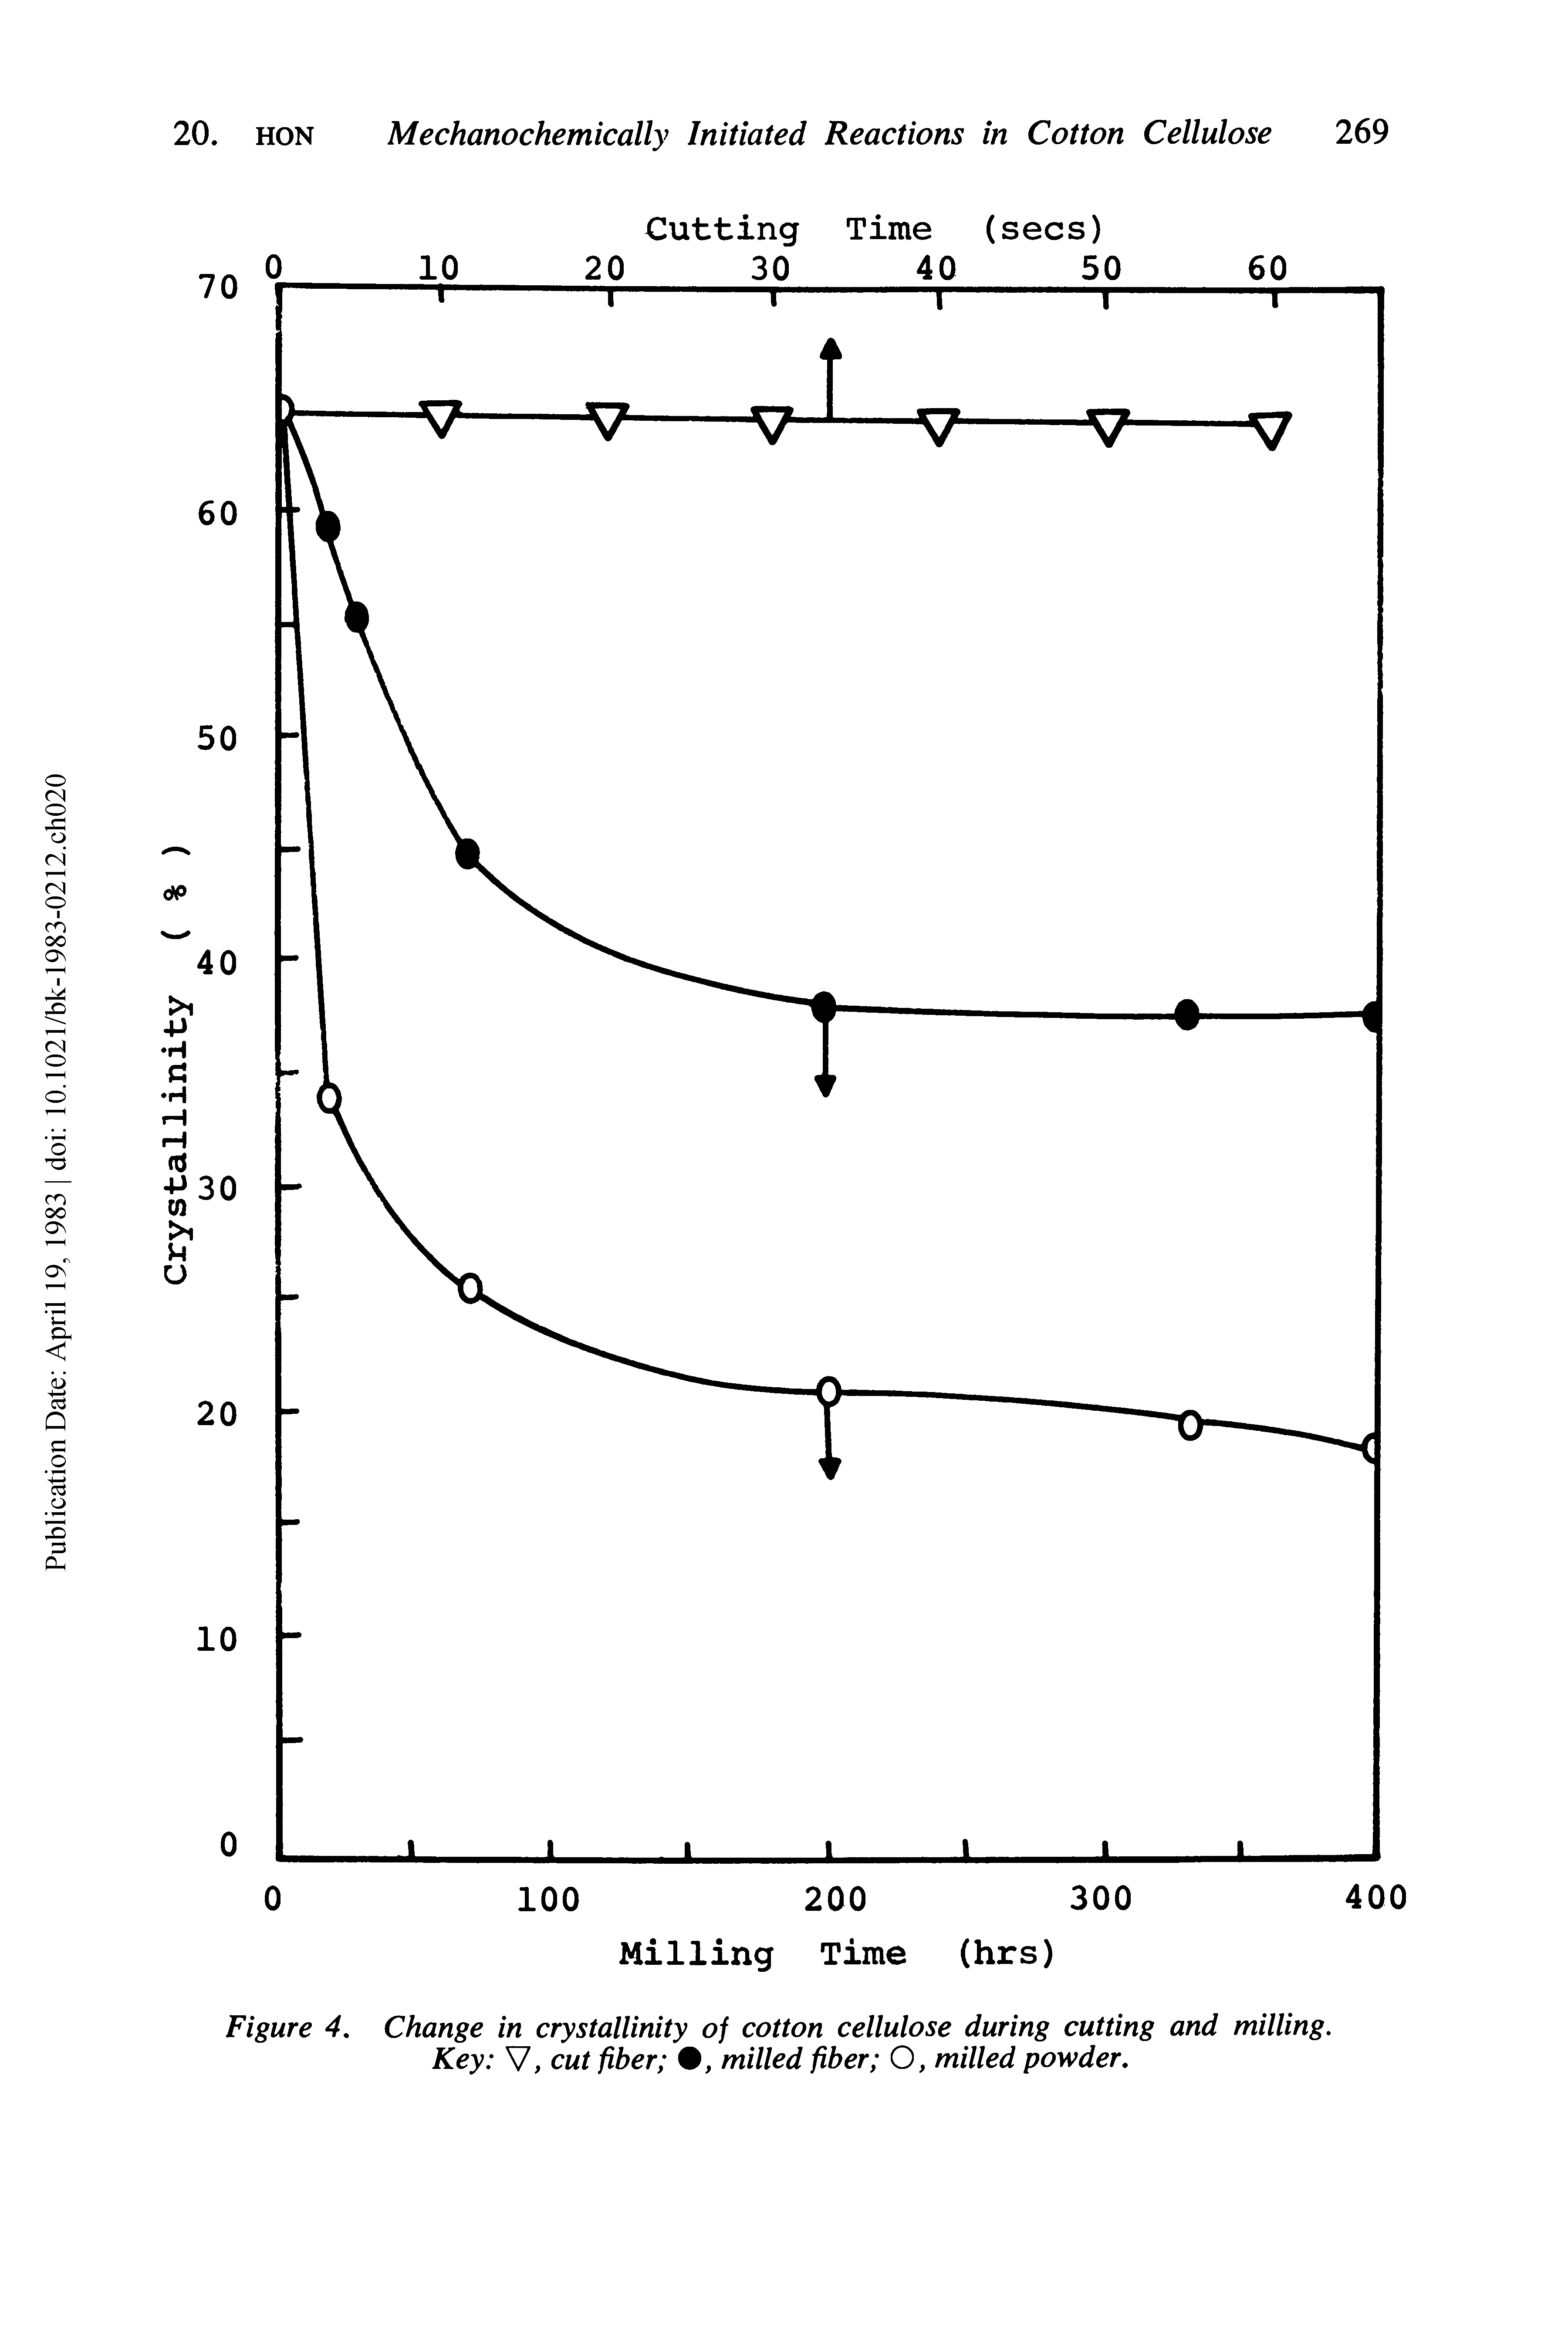 Figure 4. Change in crystallinity of cotton cellulose during cutting and milling. Key V, cut fiber , milled fiber O, milled powder.